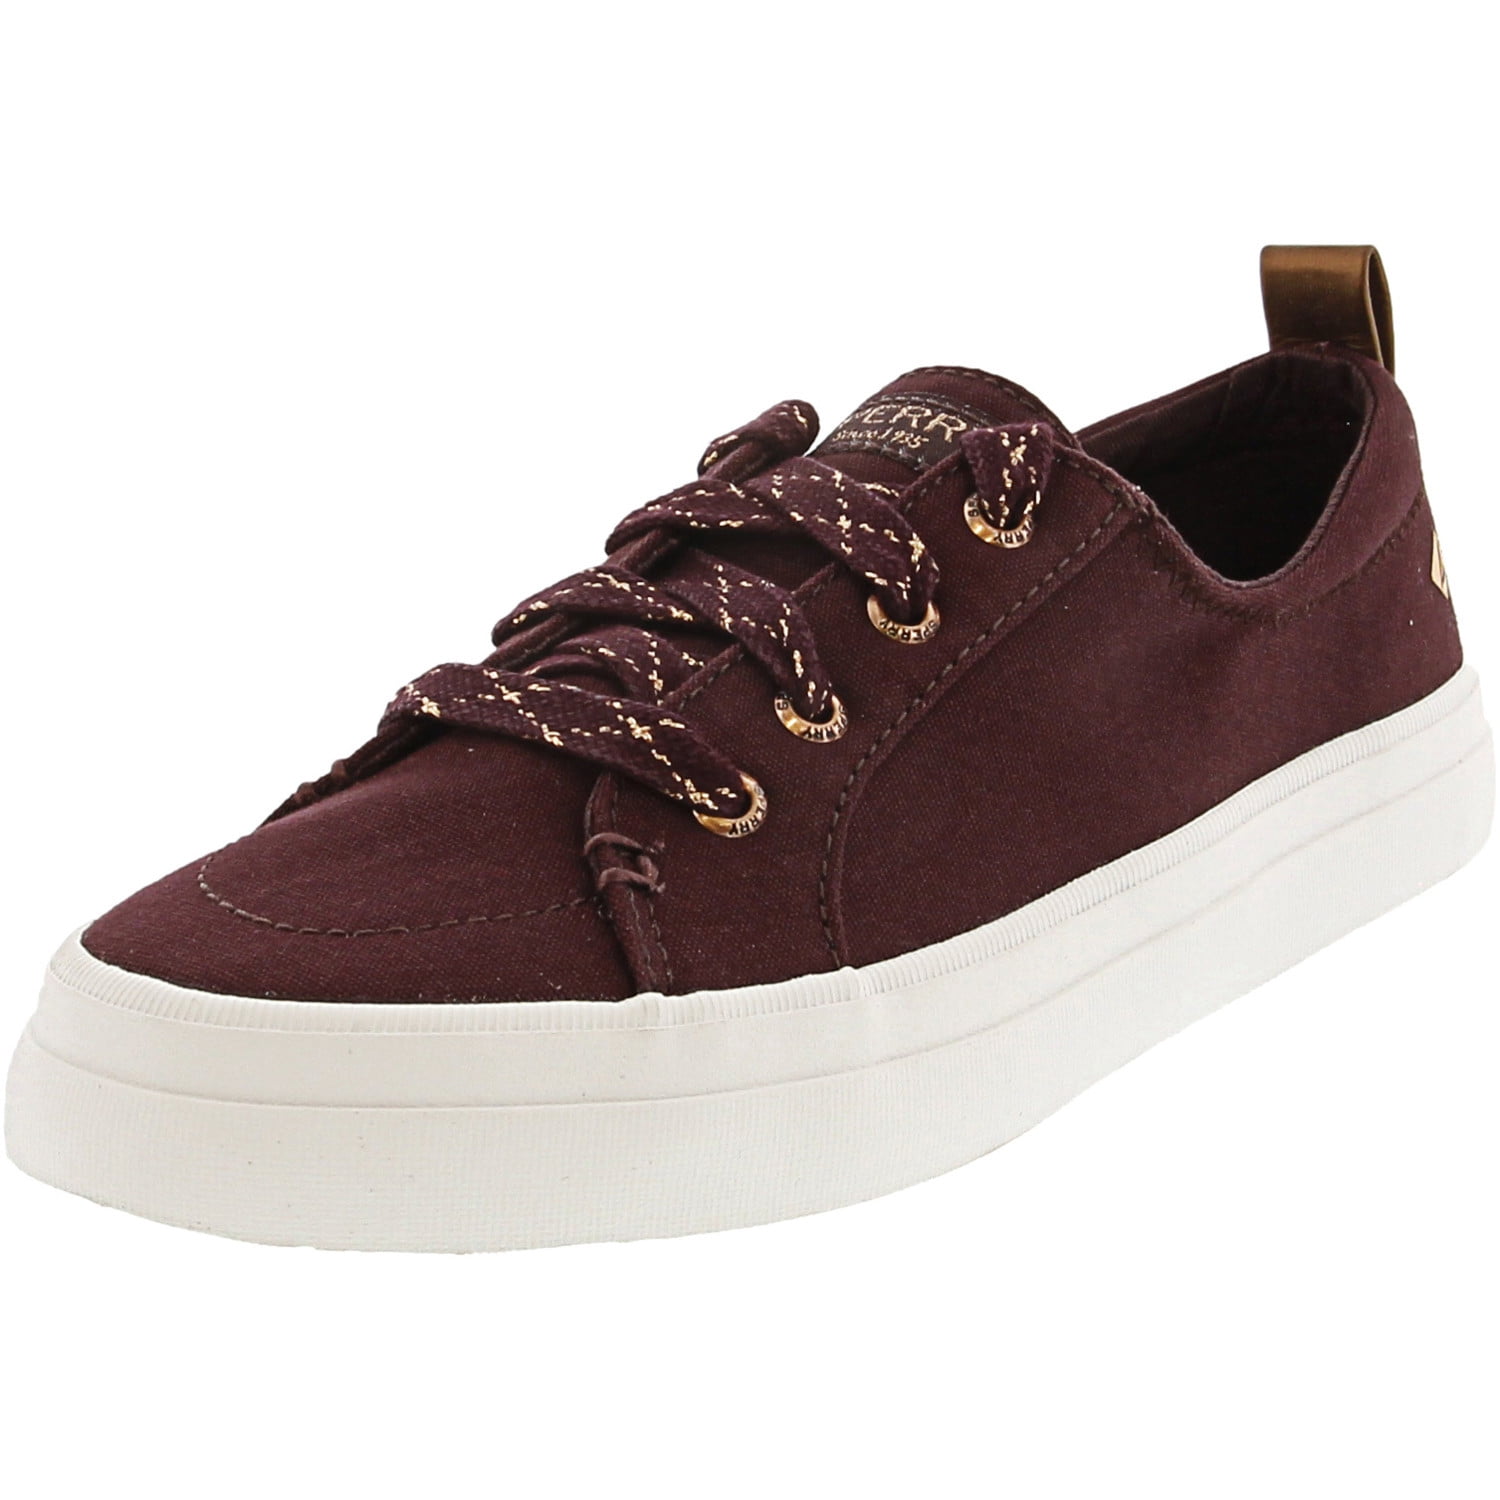 Sperry Women's Crest Vibe Canvas Wine Ankle-High Sneaker - 5.5M ...